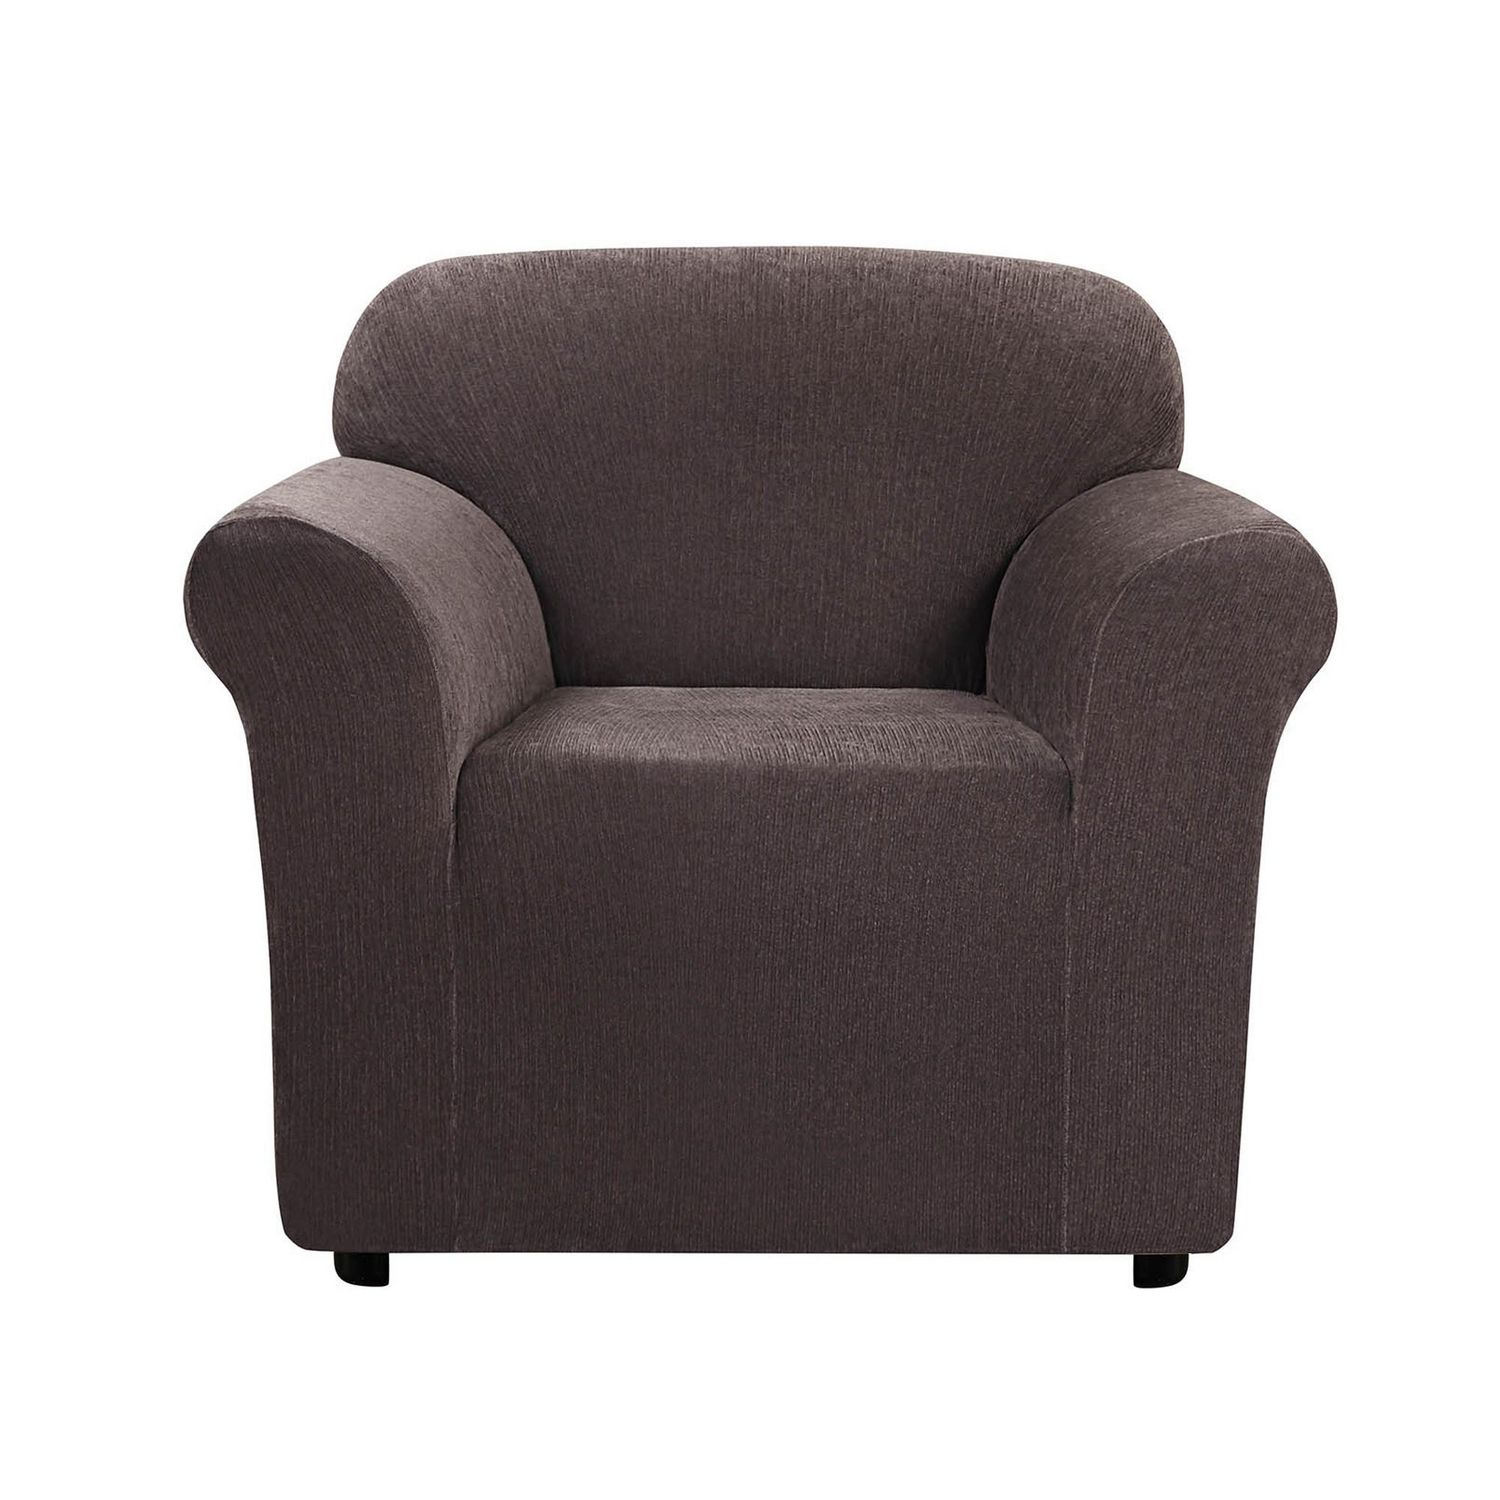 Sure Fit Stretch Chenille Armchair Slipcover | Walmart Canada